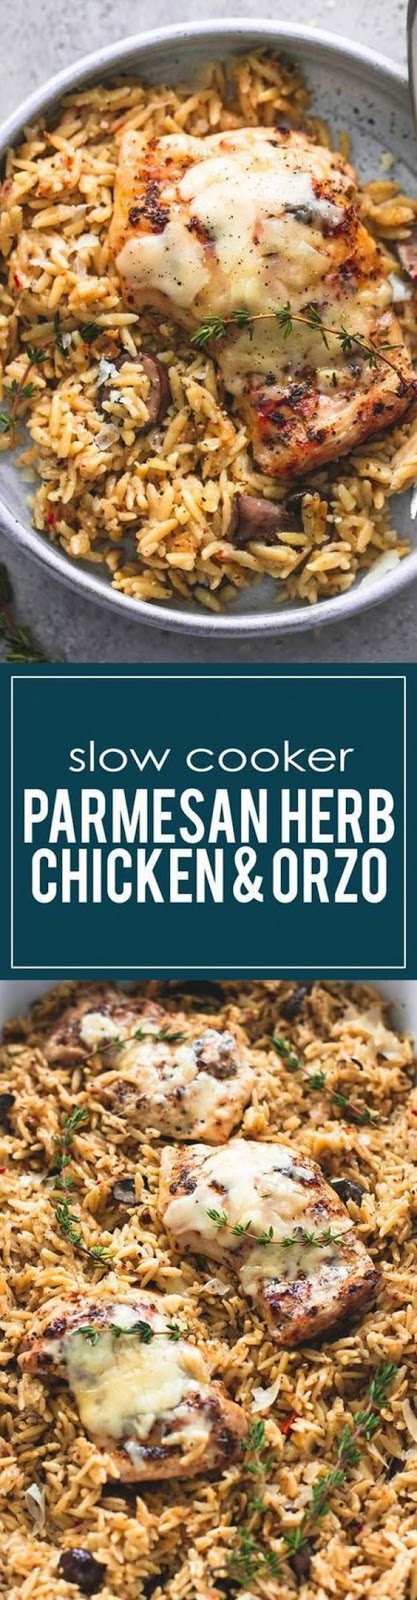 Slow Cooker Parmesan Herb Chicken & Orzo Recipe